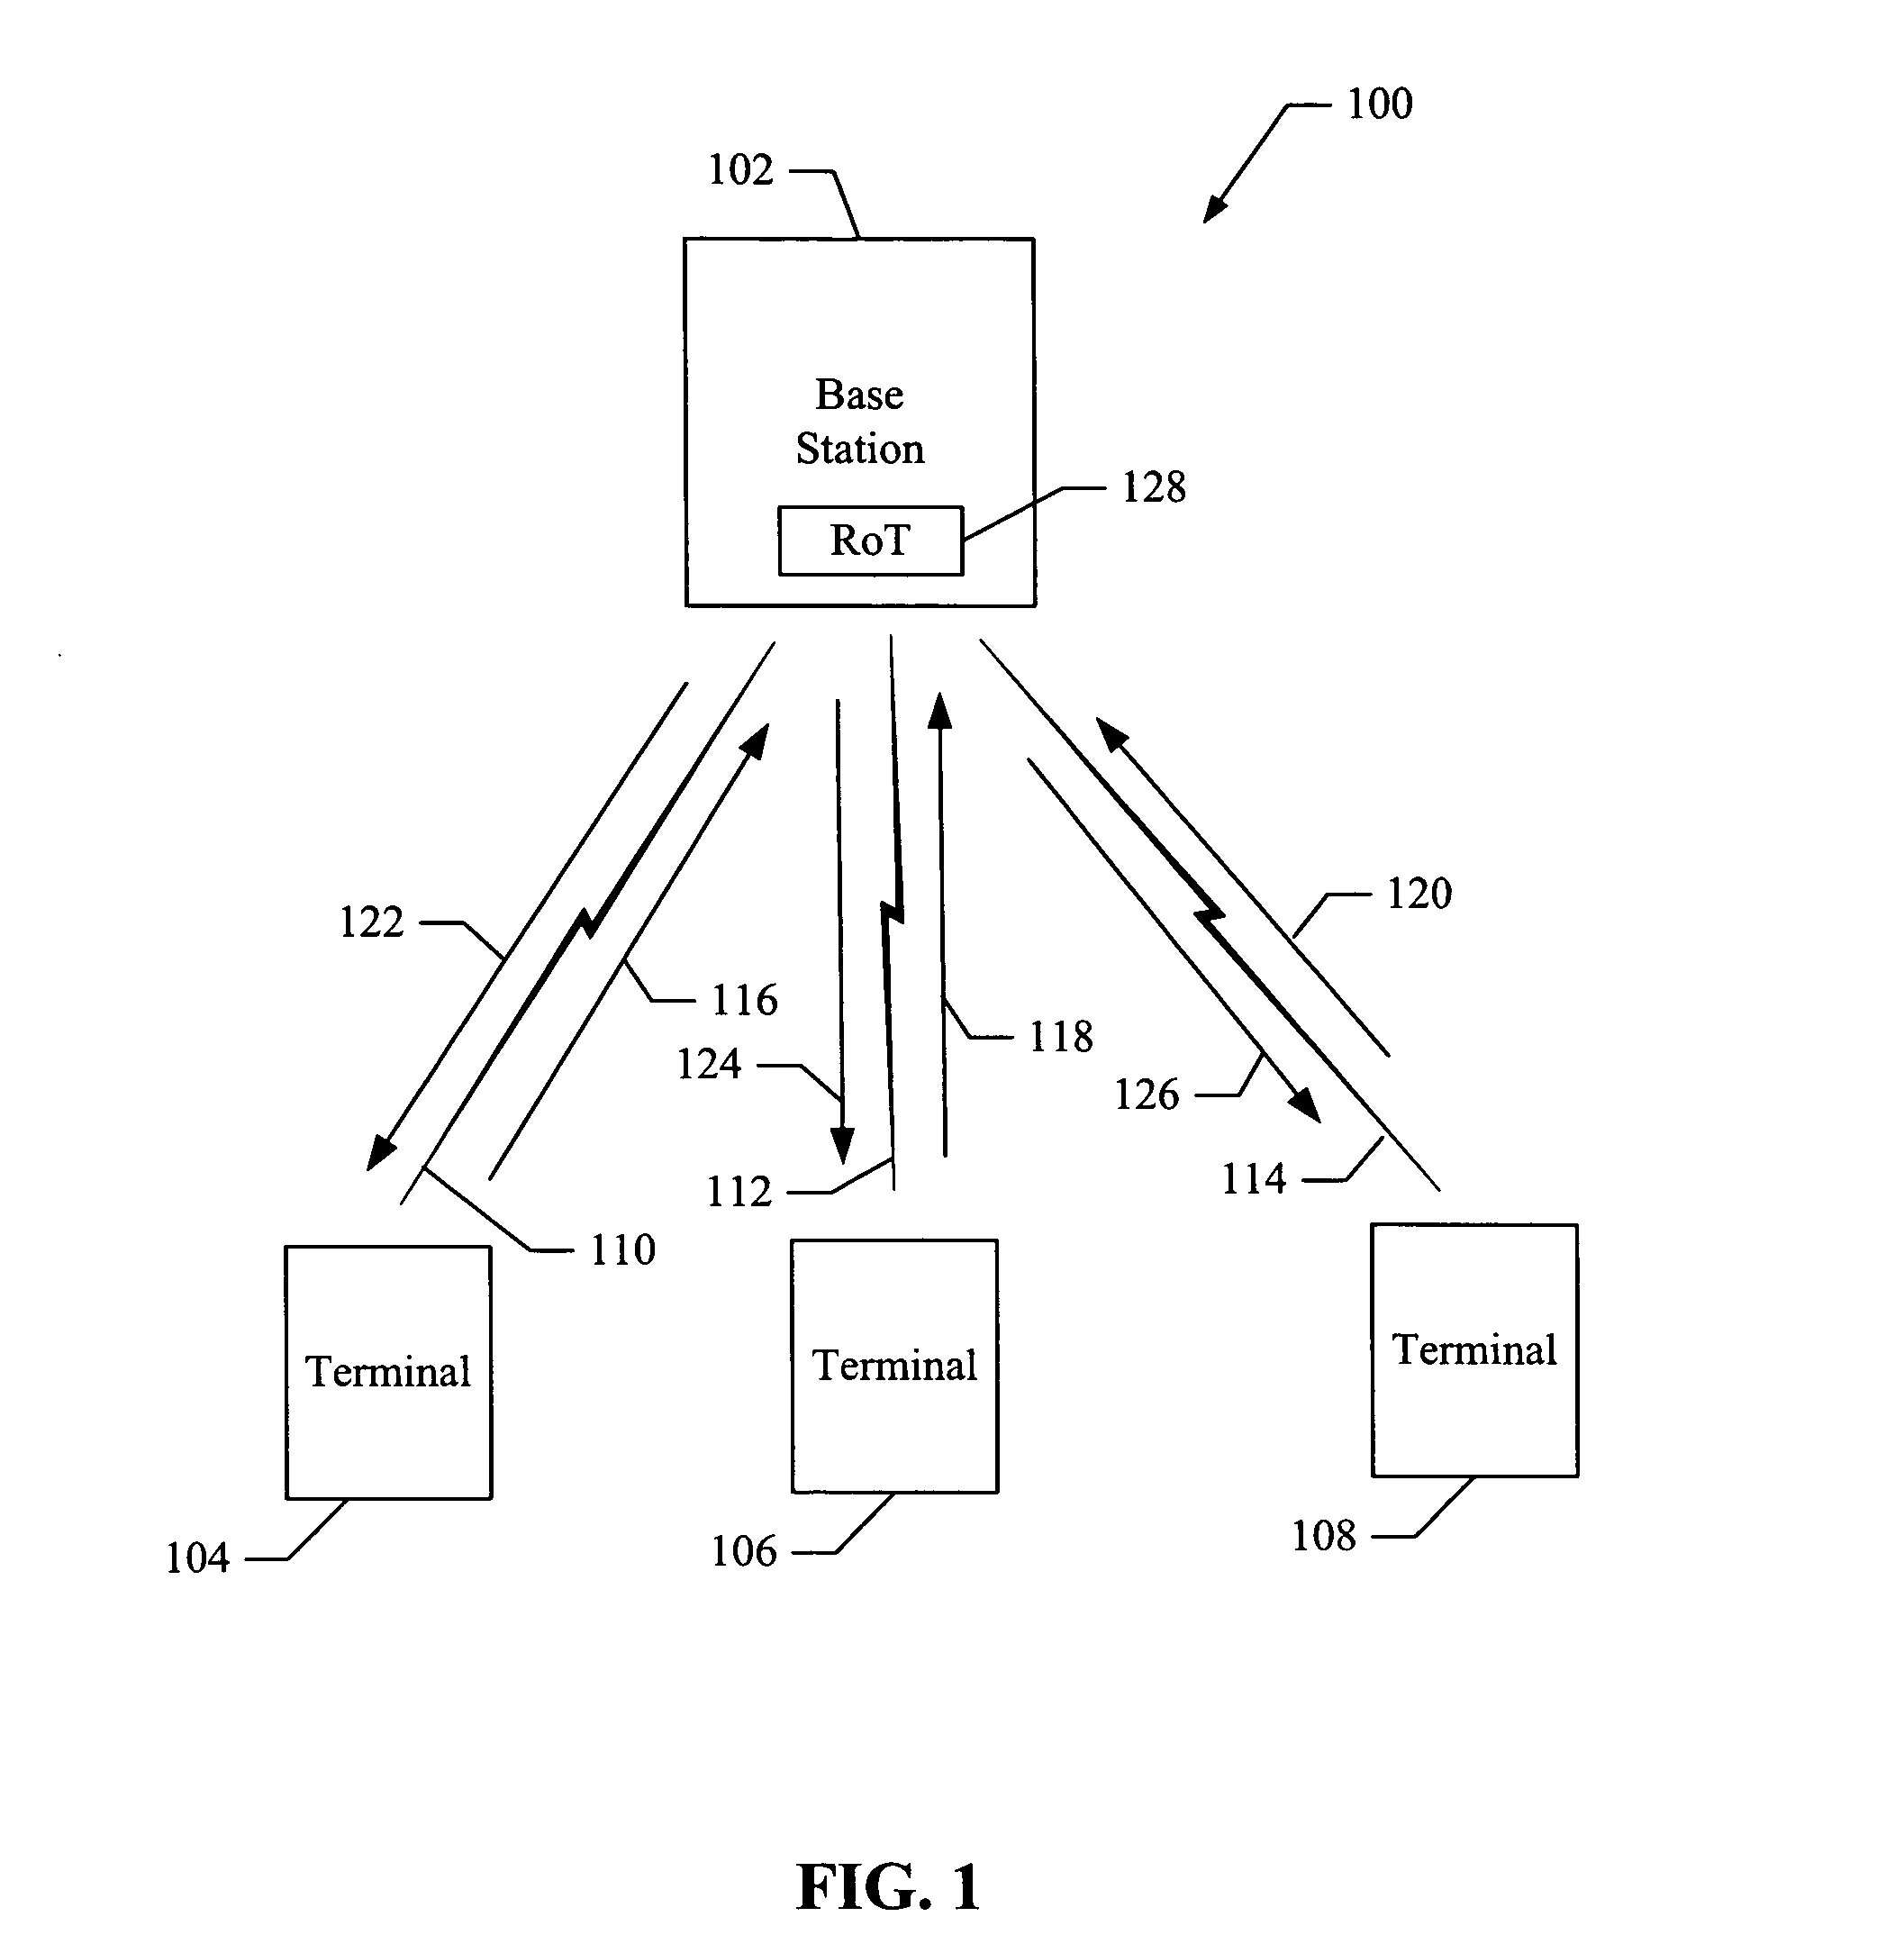 System for measuring a rise-over-thermal characteristic in a communication network